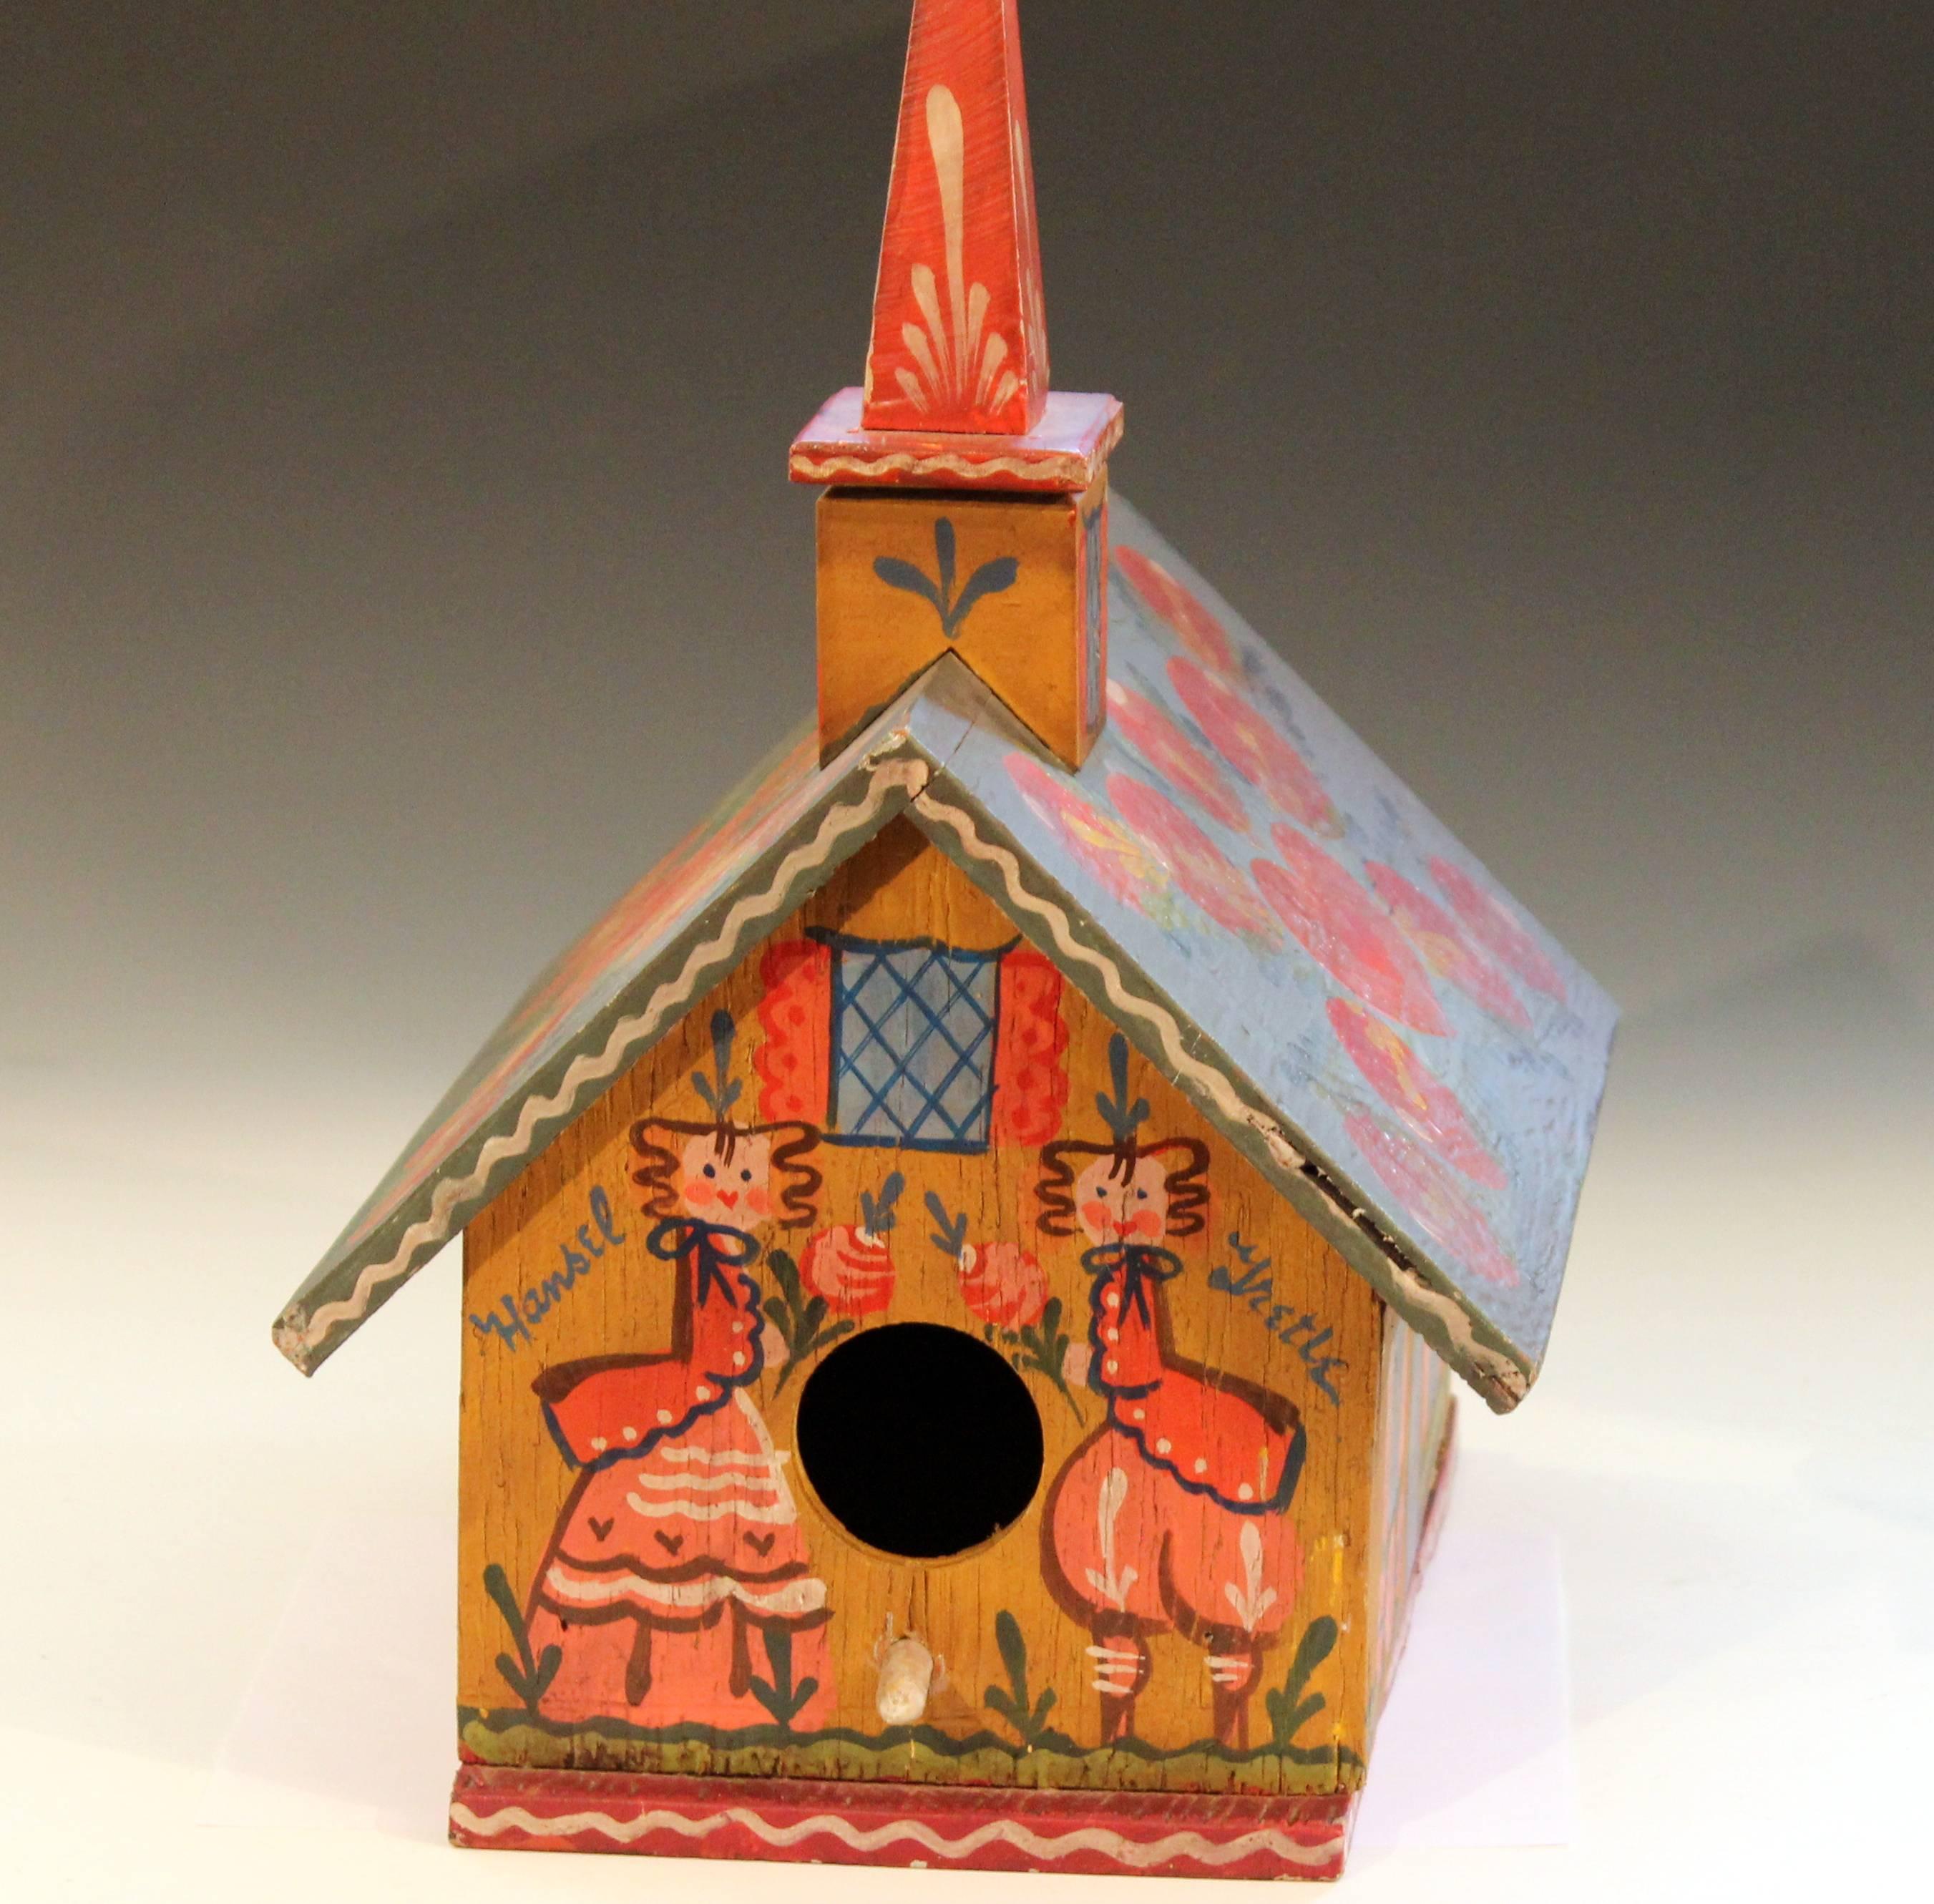 Vintage Folk Art painted birdhouse in Pennsylvania Dutch style with Hansel and Gretel theme, circa mid-20th century. Signed by renowned New England artist Nancy Whorf who learned the craft working with Peter Hunt. Measures: 17 1/4